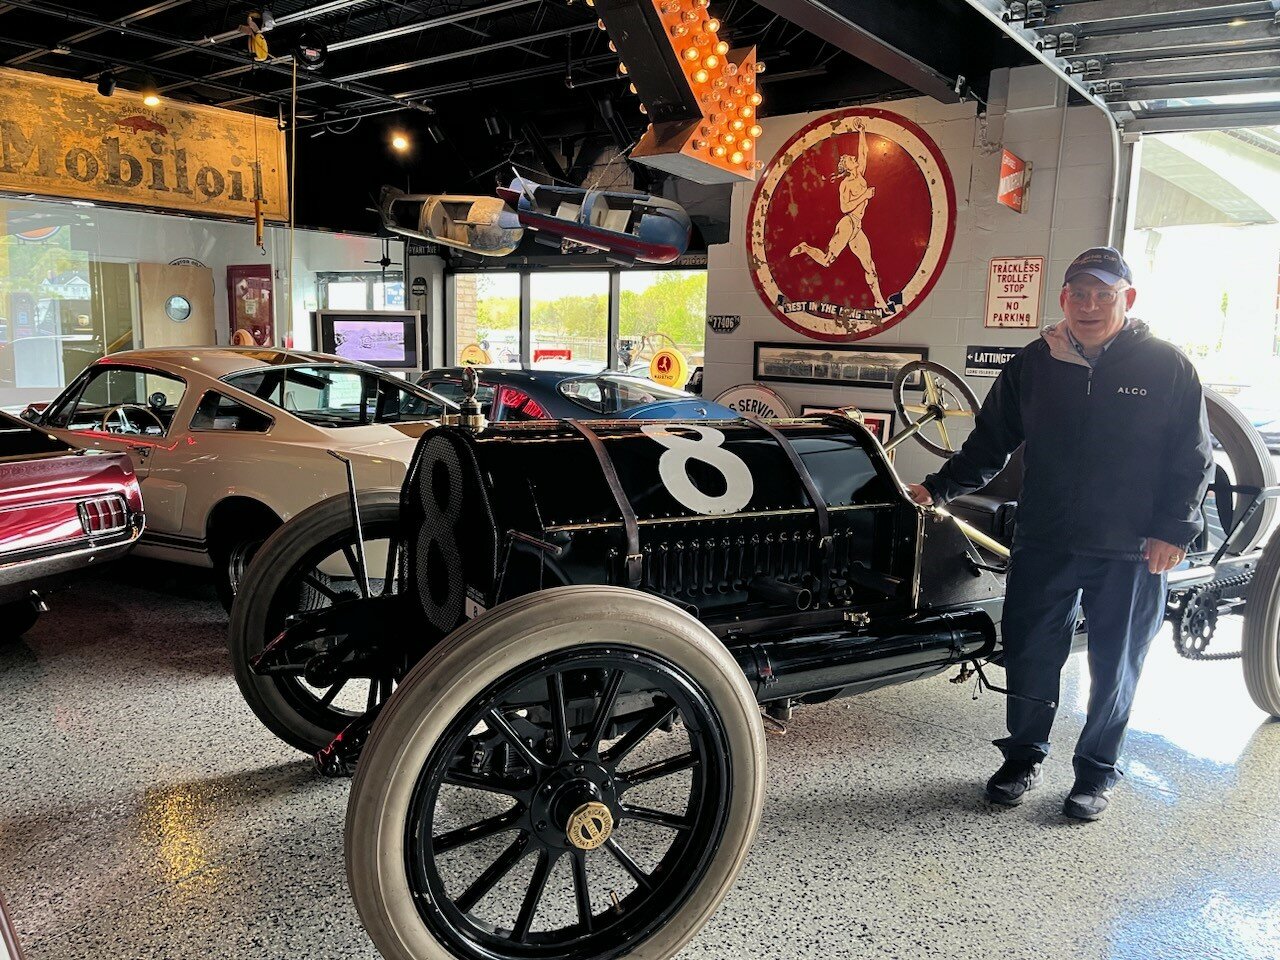 Vintage car collector Howard Kroplick with his 1909 ALCO-6 Racer, which won the 1909 and 1910 Vanderbilt Cup and participated in the first Indianapolis 500 race (1911).